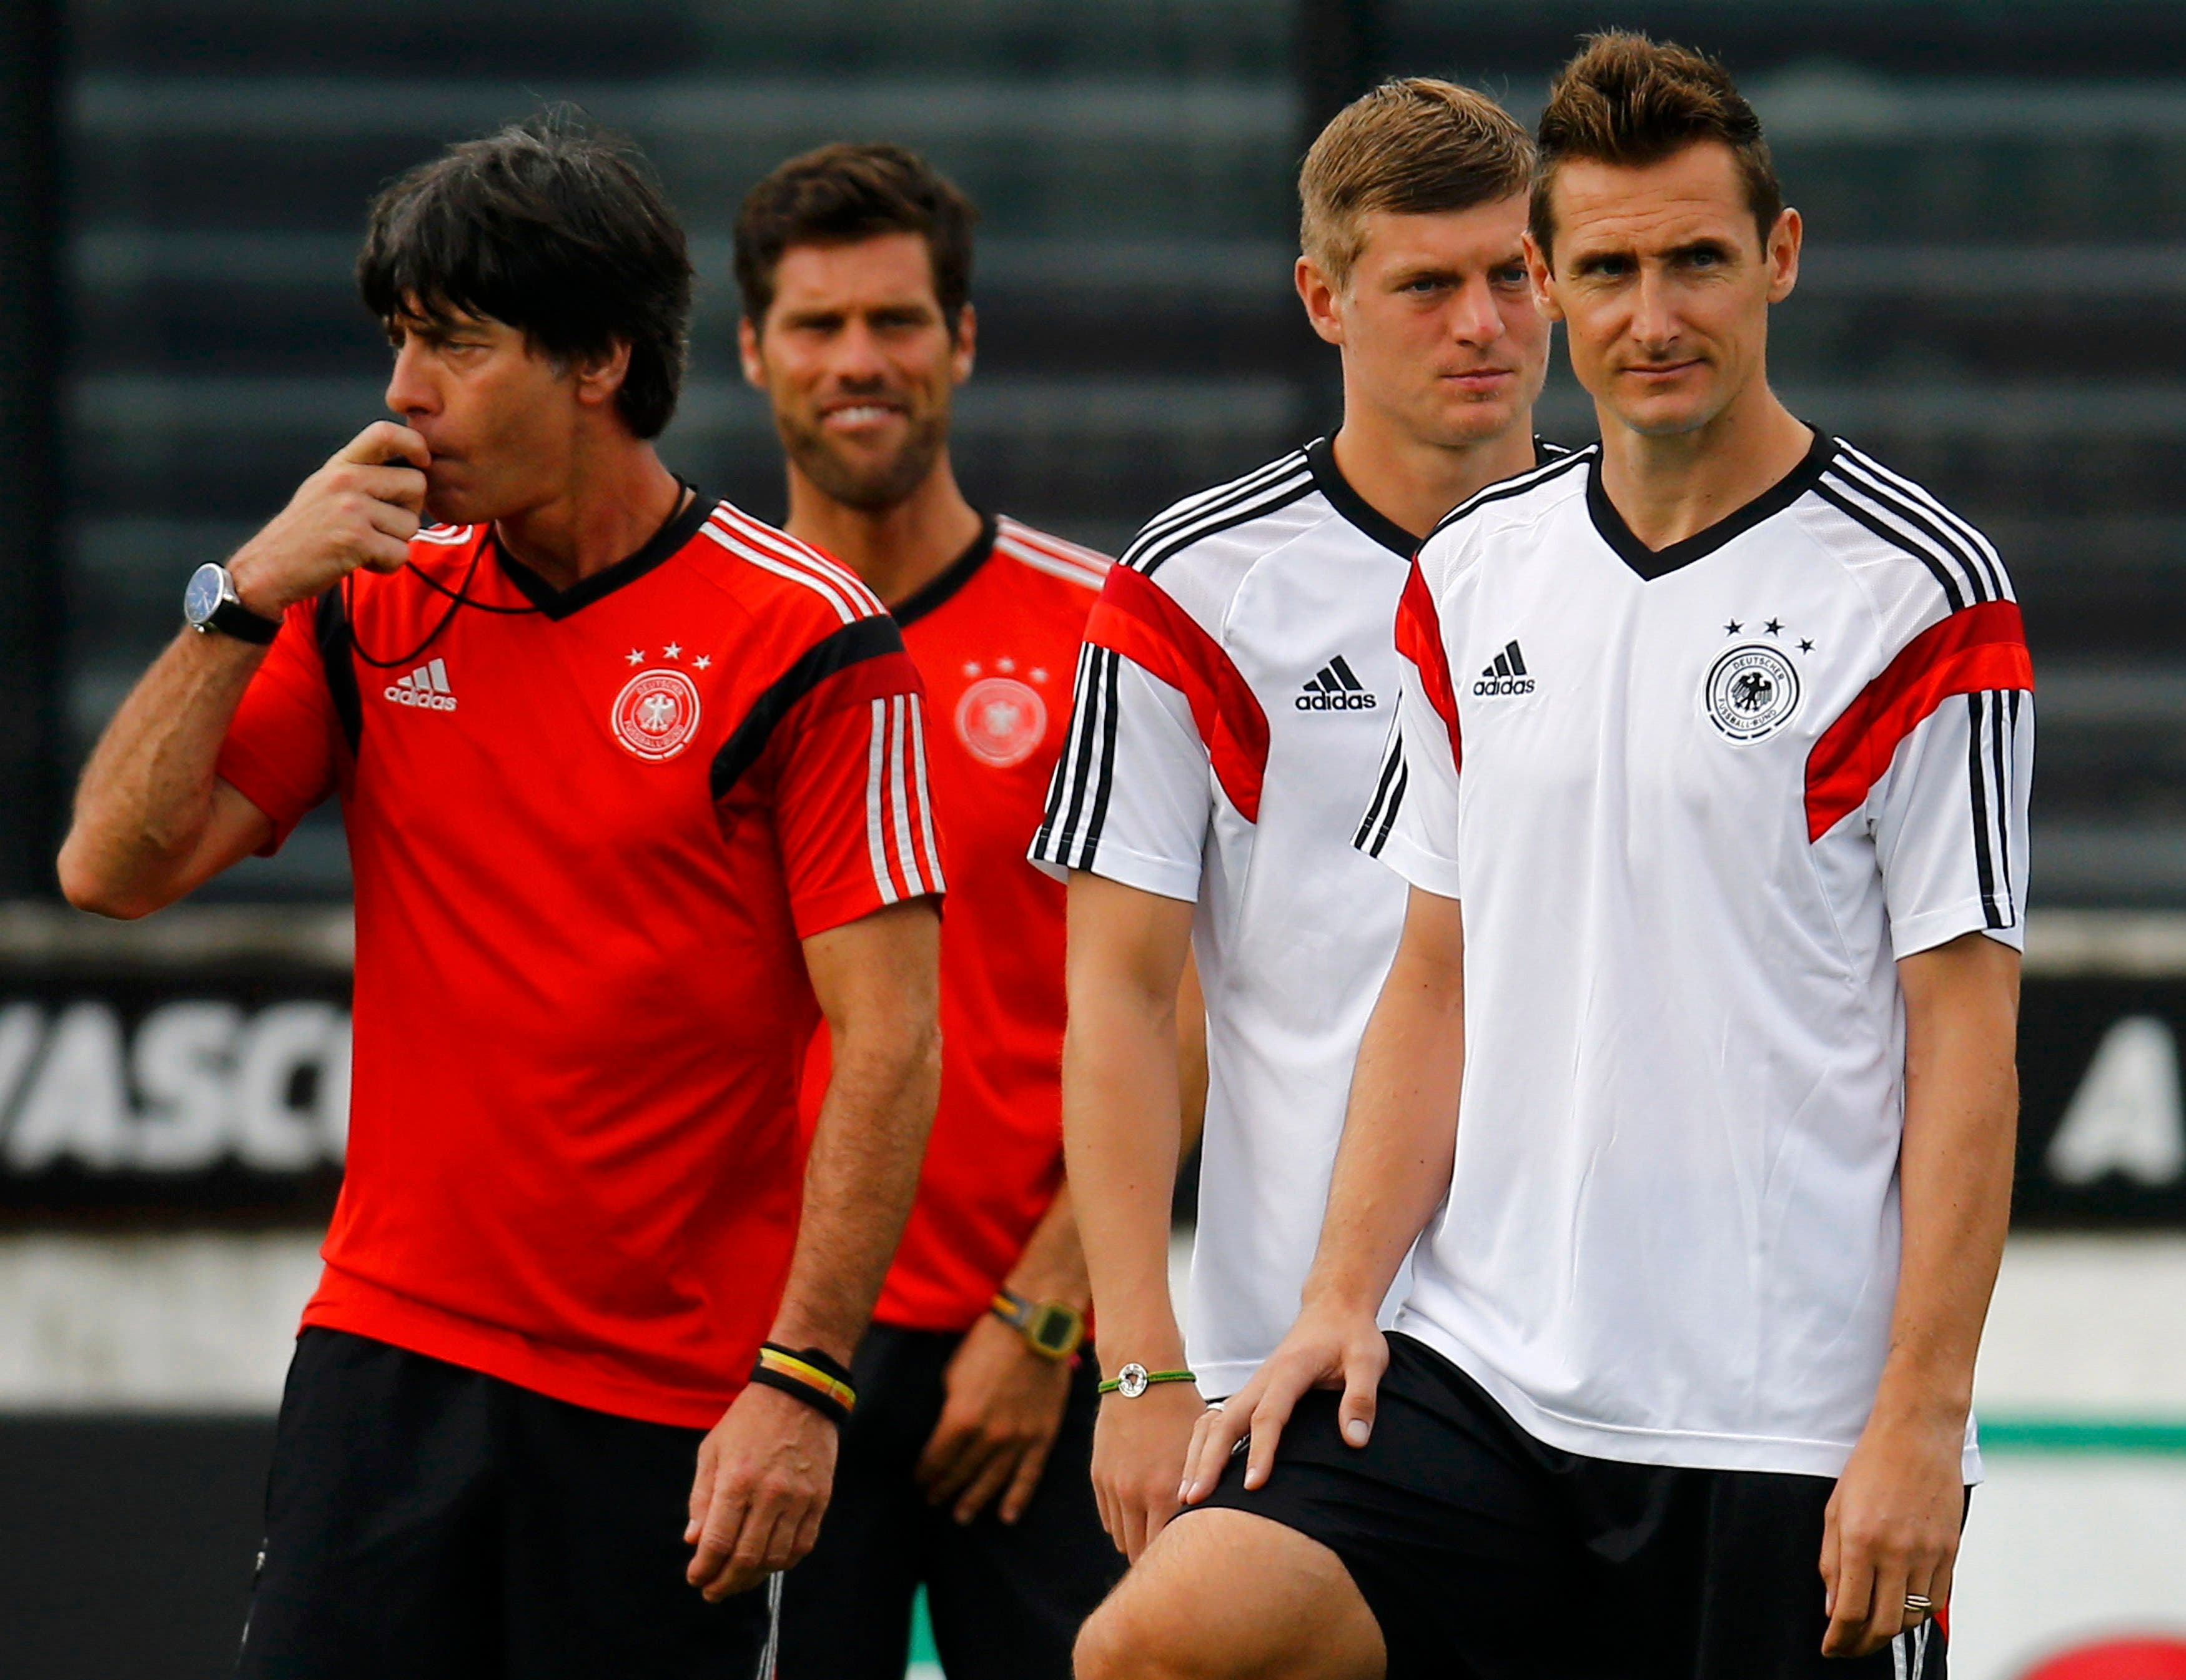 Germany's coach Joachim Loew (L) conducts a training session with players Miroslav Klose (R) and Toni Kroos (2nd R) in Rio de Janeiro July 12, 2014. (Reuters)